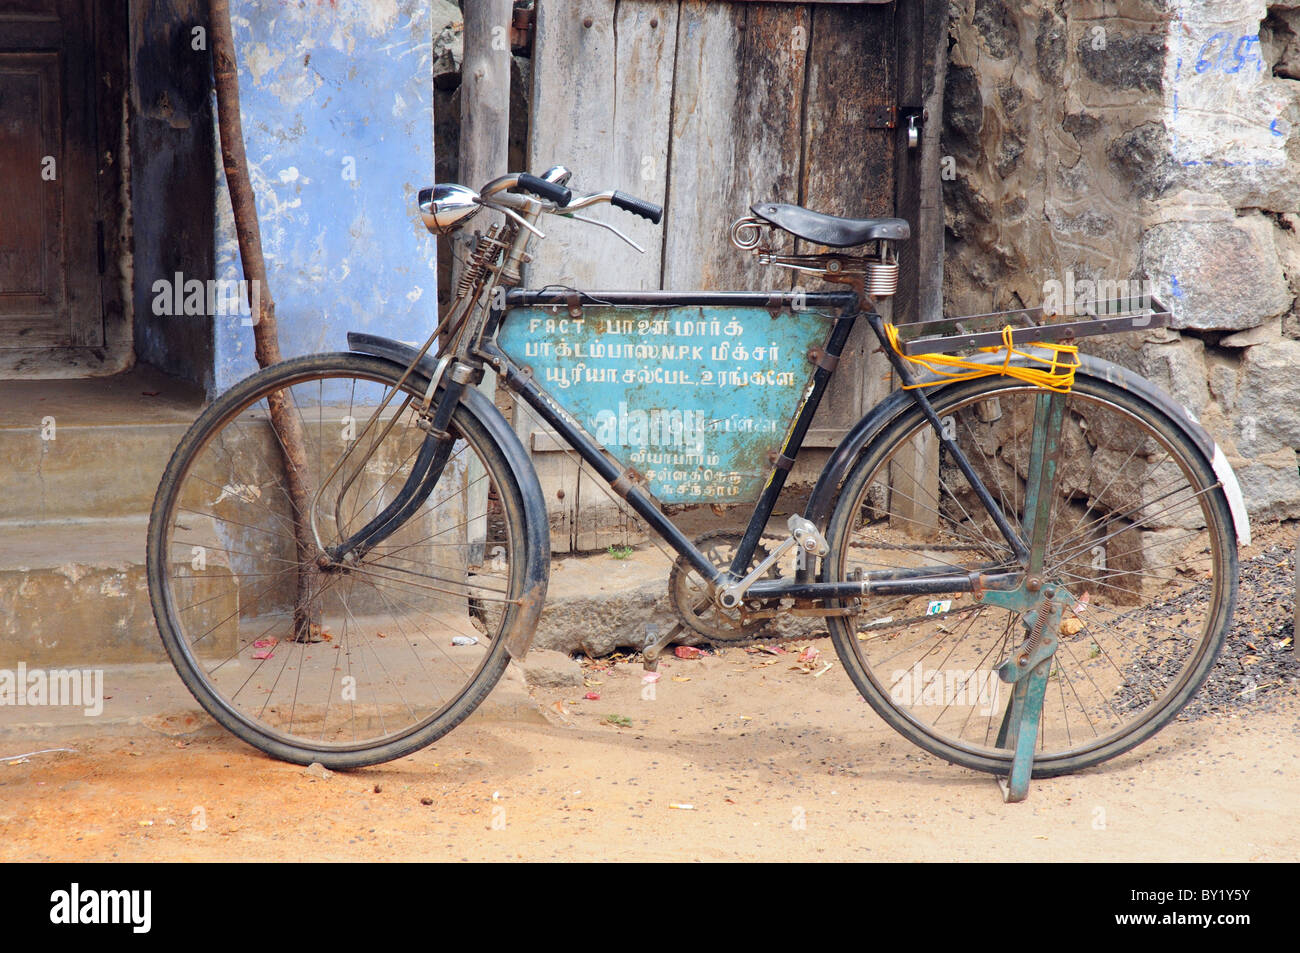 An old bicycle in an Indian street Stock Photo - Alamy